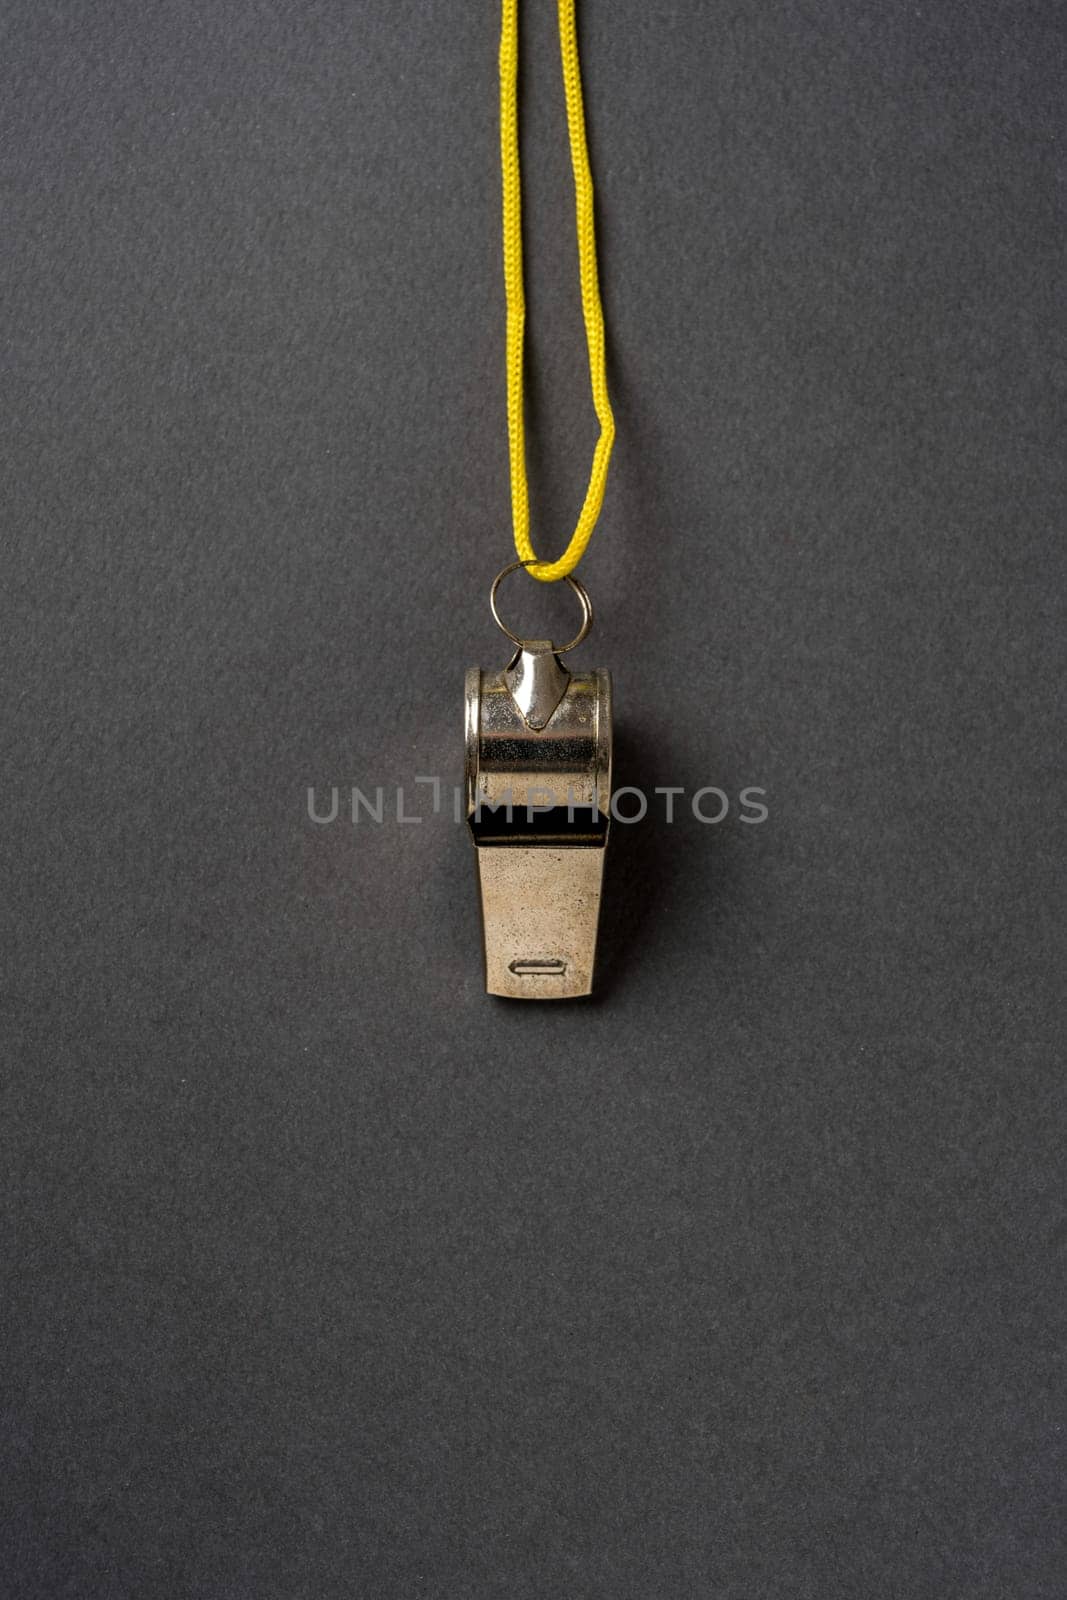 Top view of metal whistle with yellow string on dark gray background by Sonat